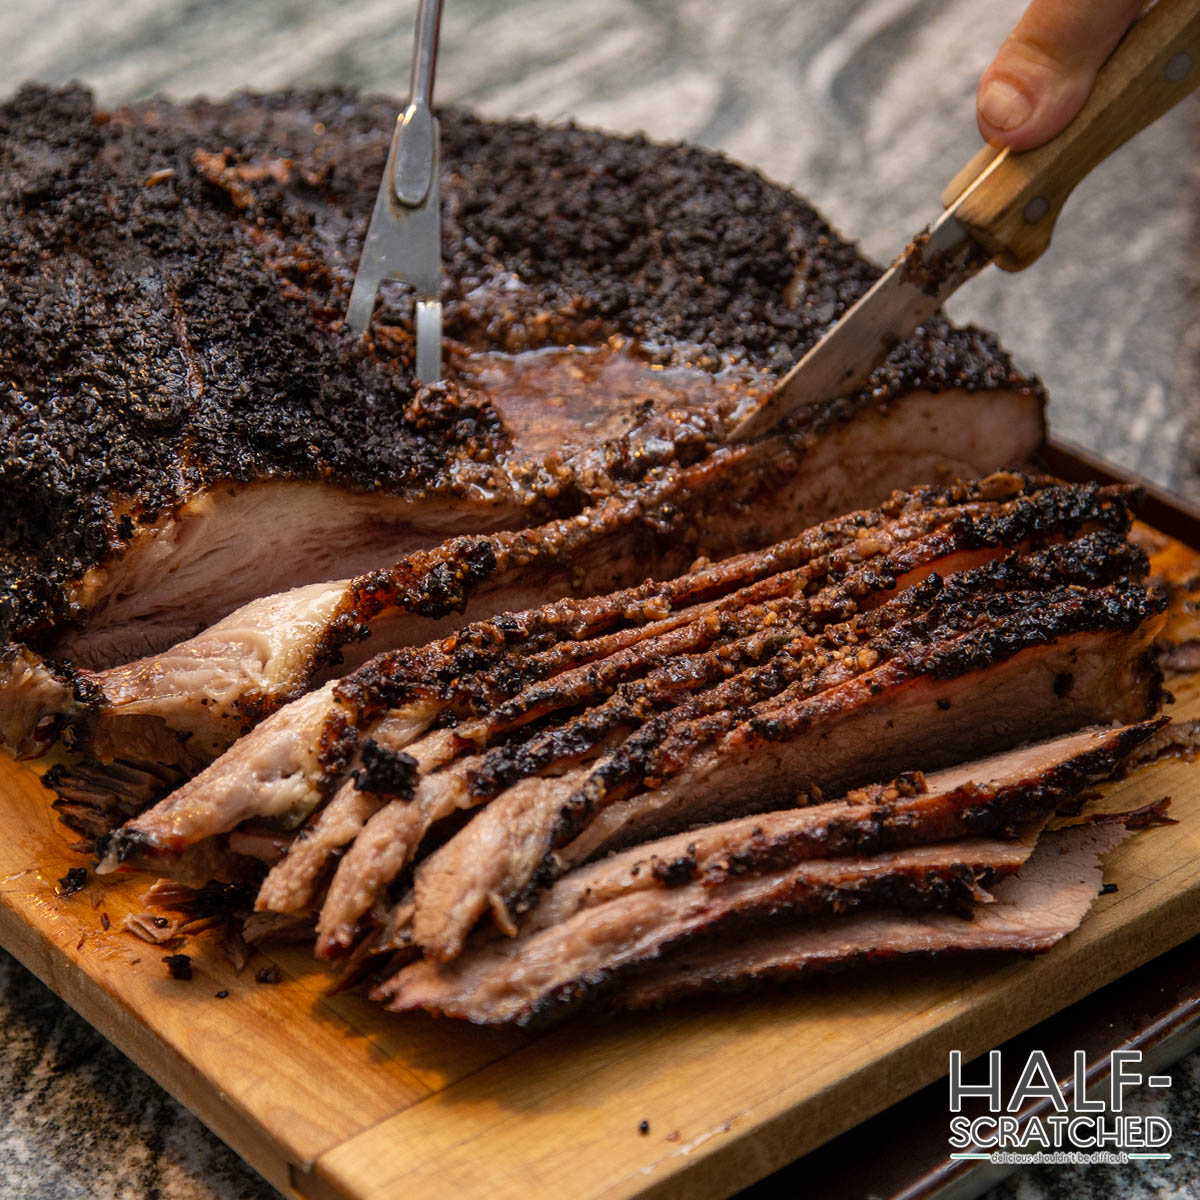 Slicing a slow cooked smoked brisket